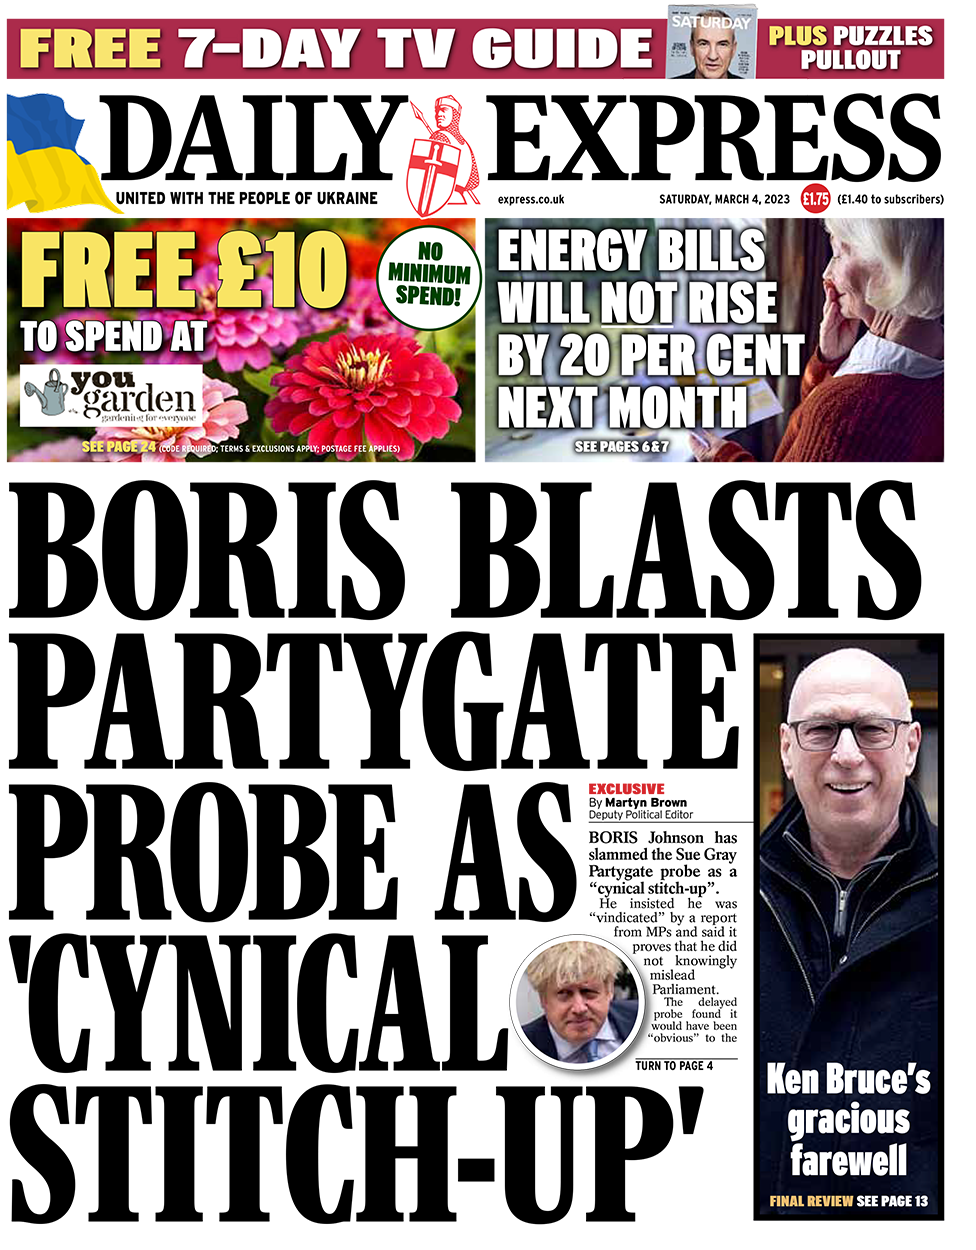 The headline in the Daily Express reads: Boris blasts Partygate probe as 'cynical stitch-up'